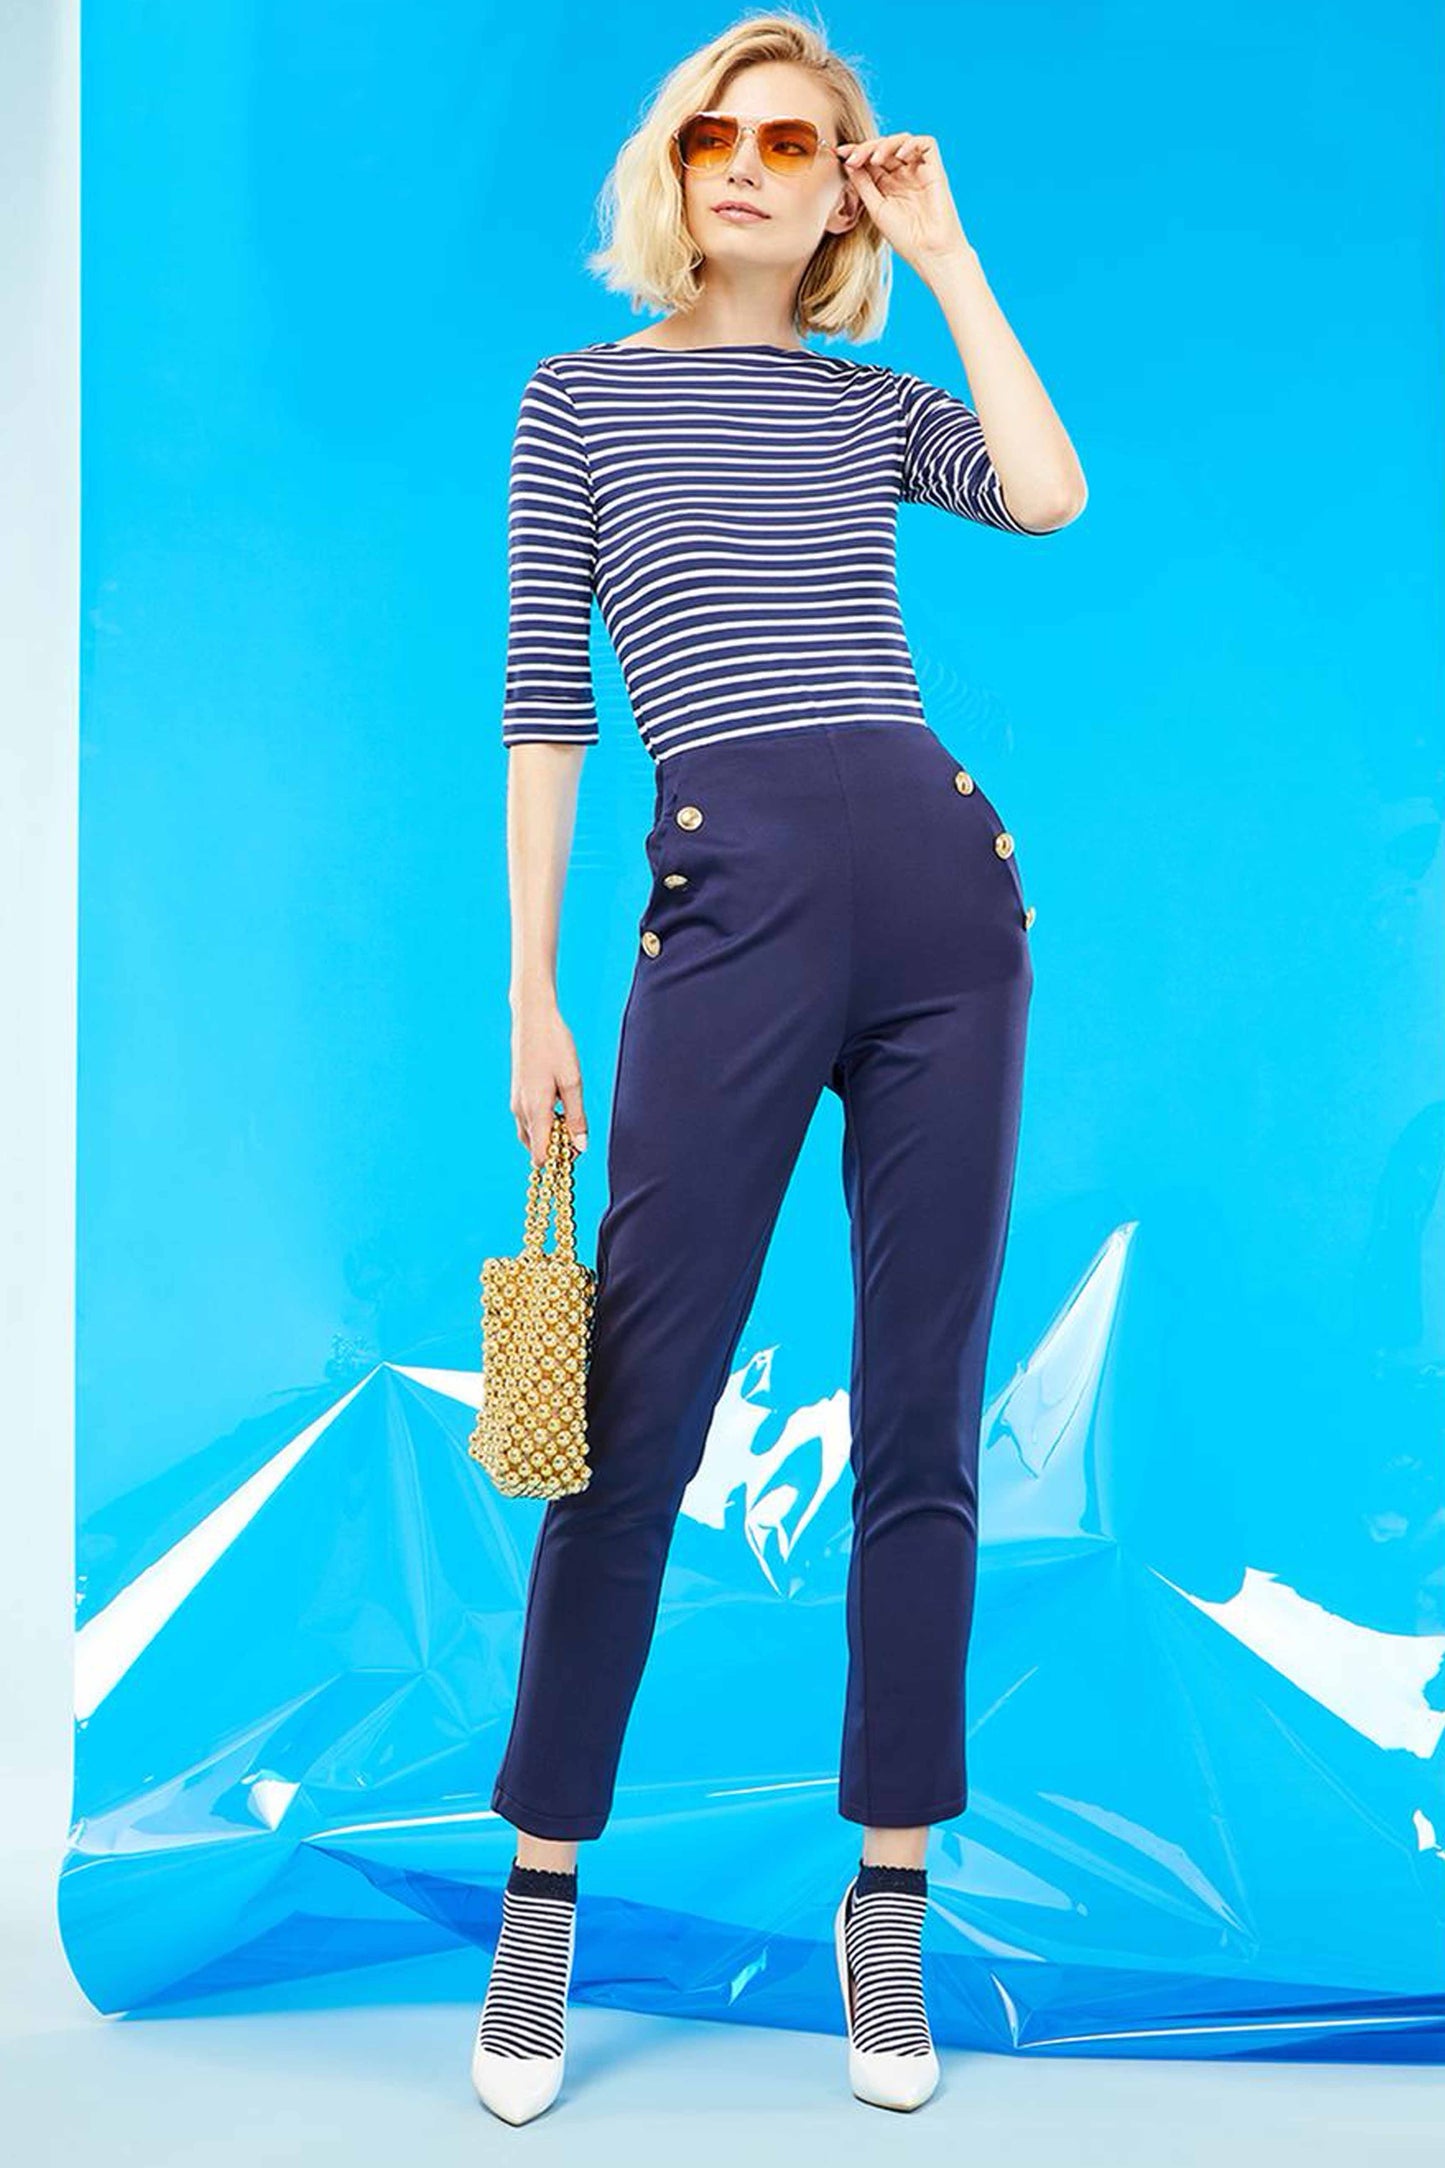 SiSi Brigitte Trouser - High waisted navy blue trouser leggings with elasticated waist band on the back, side pockets and big gold button details along the pockets. Worn with a stripe top, low ankle socks and white high heels.